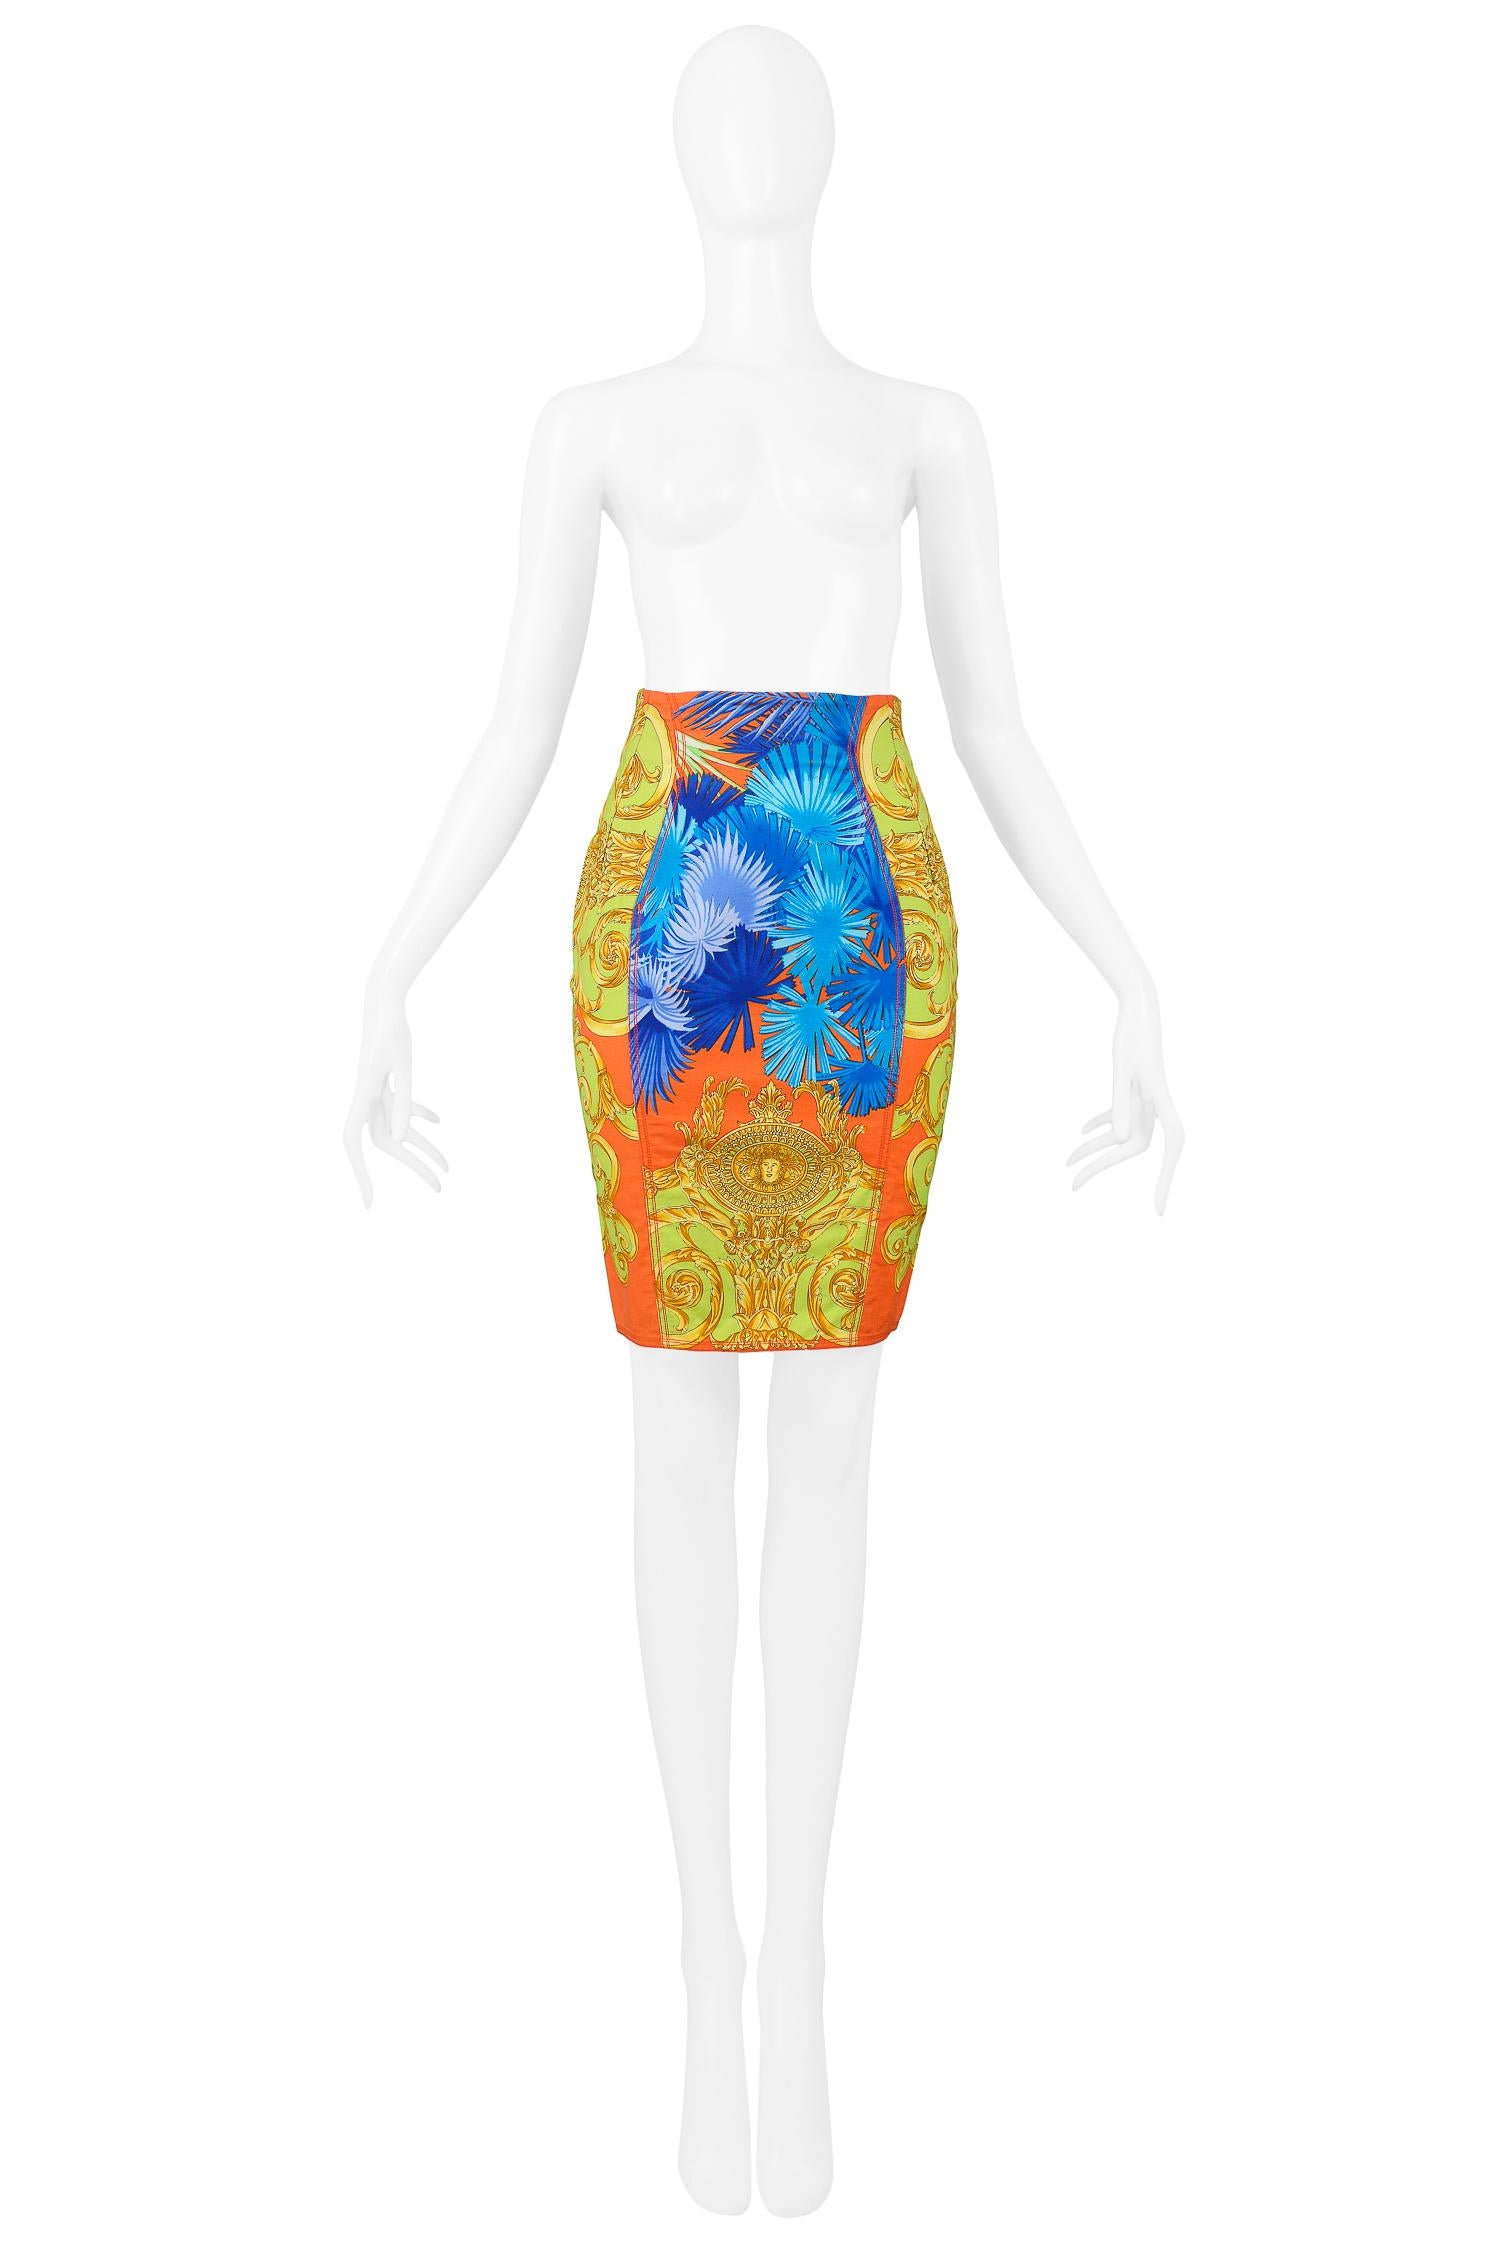 Vintage Versace orange, cobalt blue, and neon green cotton pencil skirt with palm frond and gold baroque-style print. Circa 1990s.

Excellent Vintage Condition.

Size 38